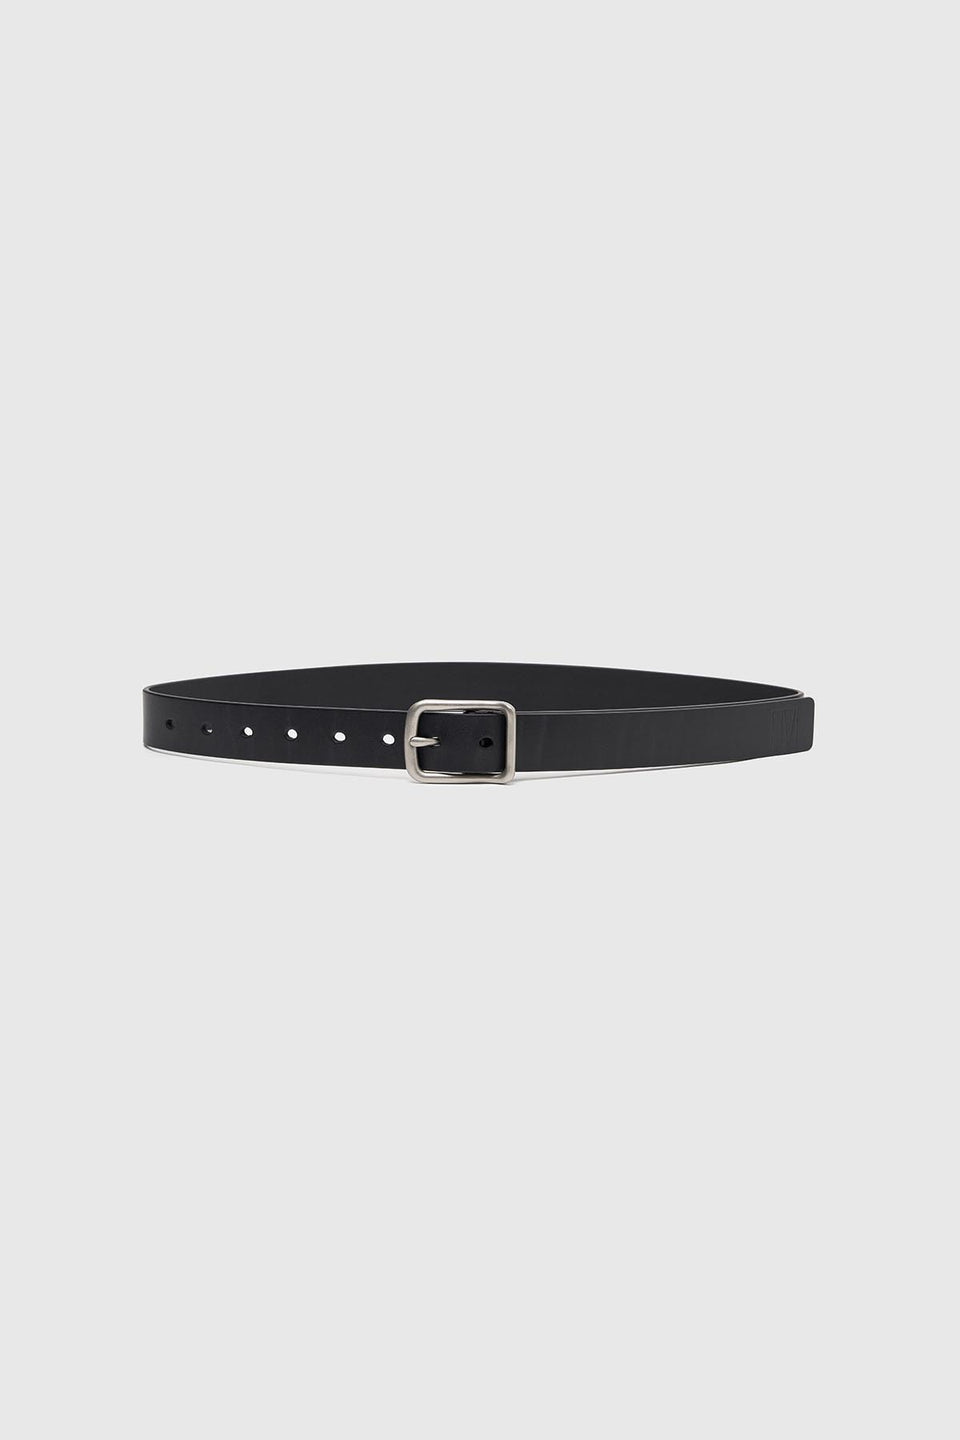 Women's Belts | Leather, Studded & more | CAMILLA AND MARC